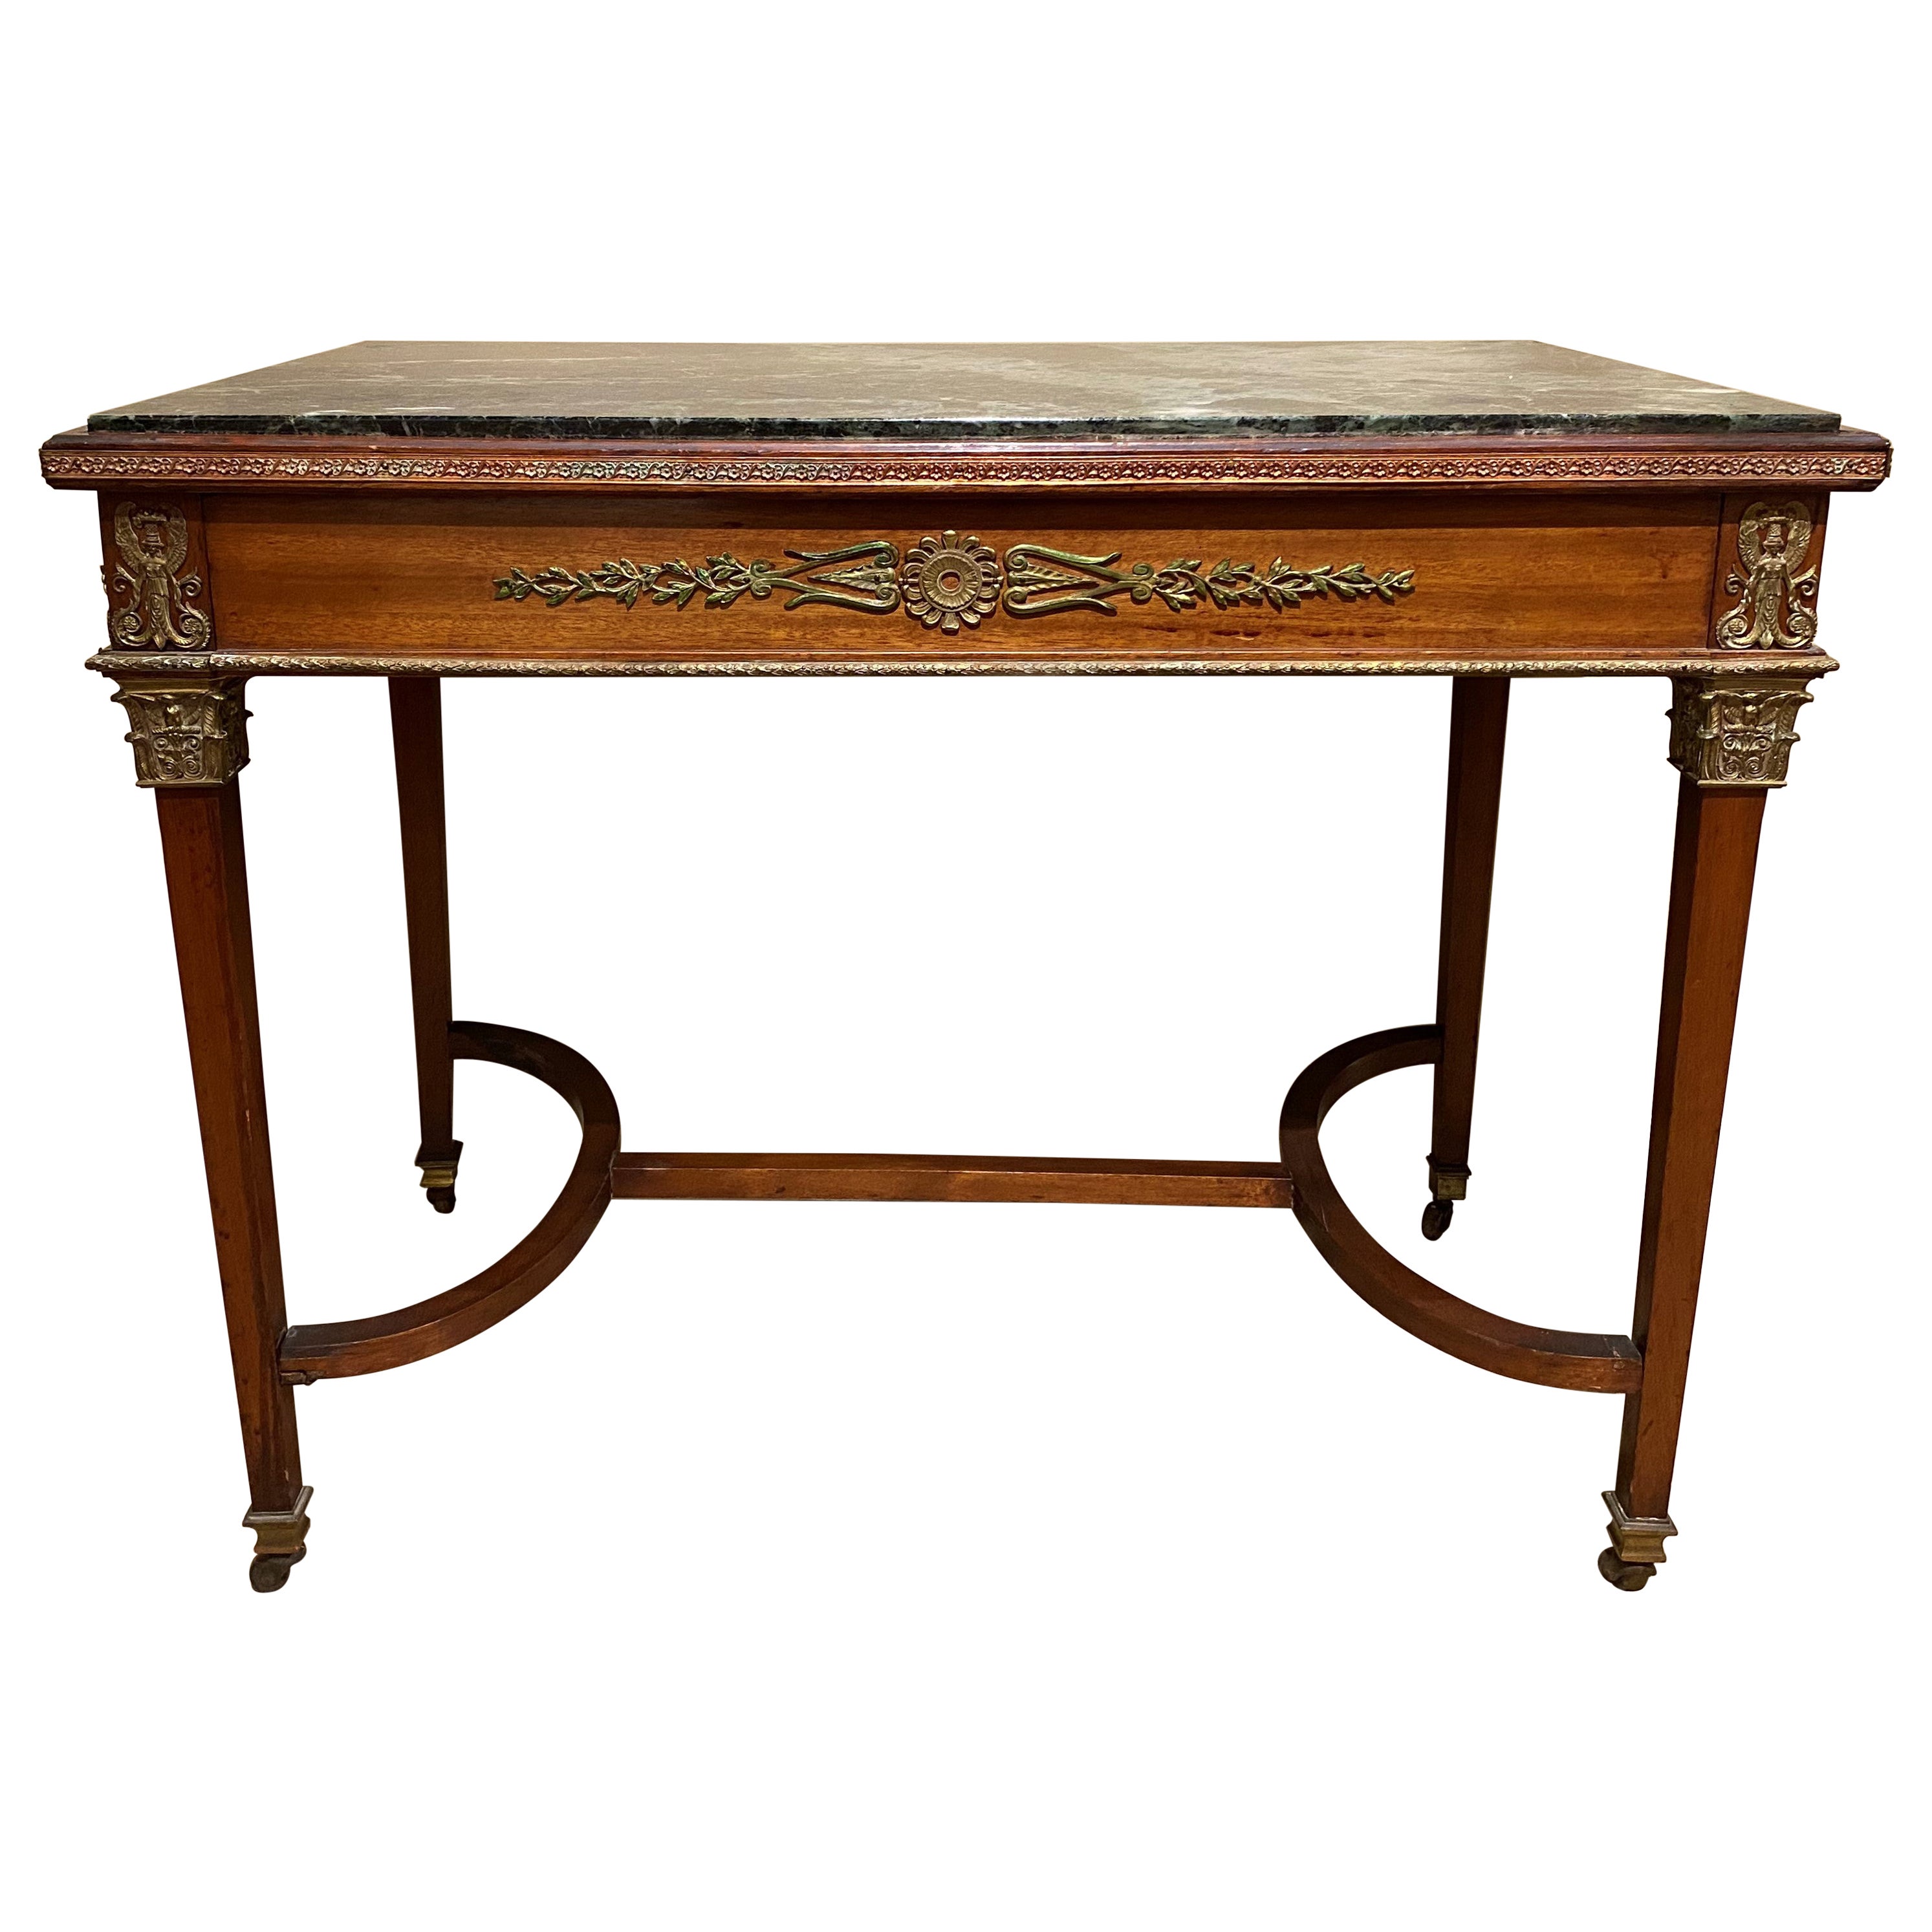 RJ Horner & Co French Marble Top One-Drawer Writing Table with Ormolu For Sale